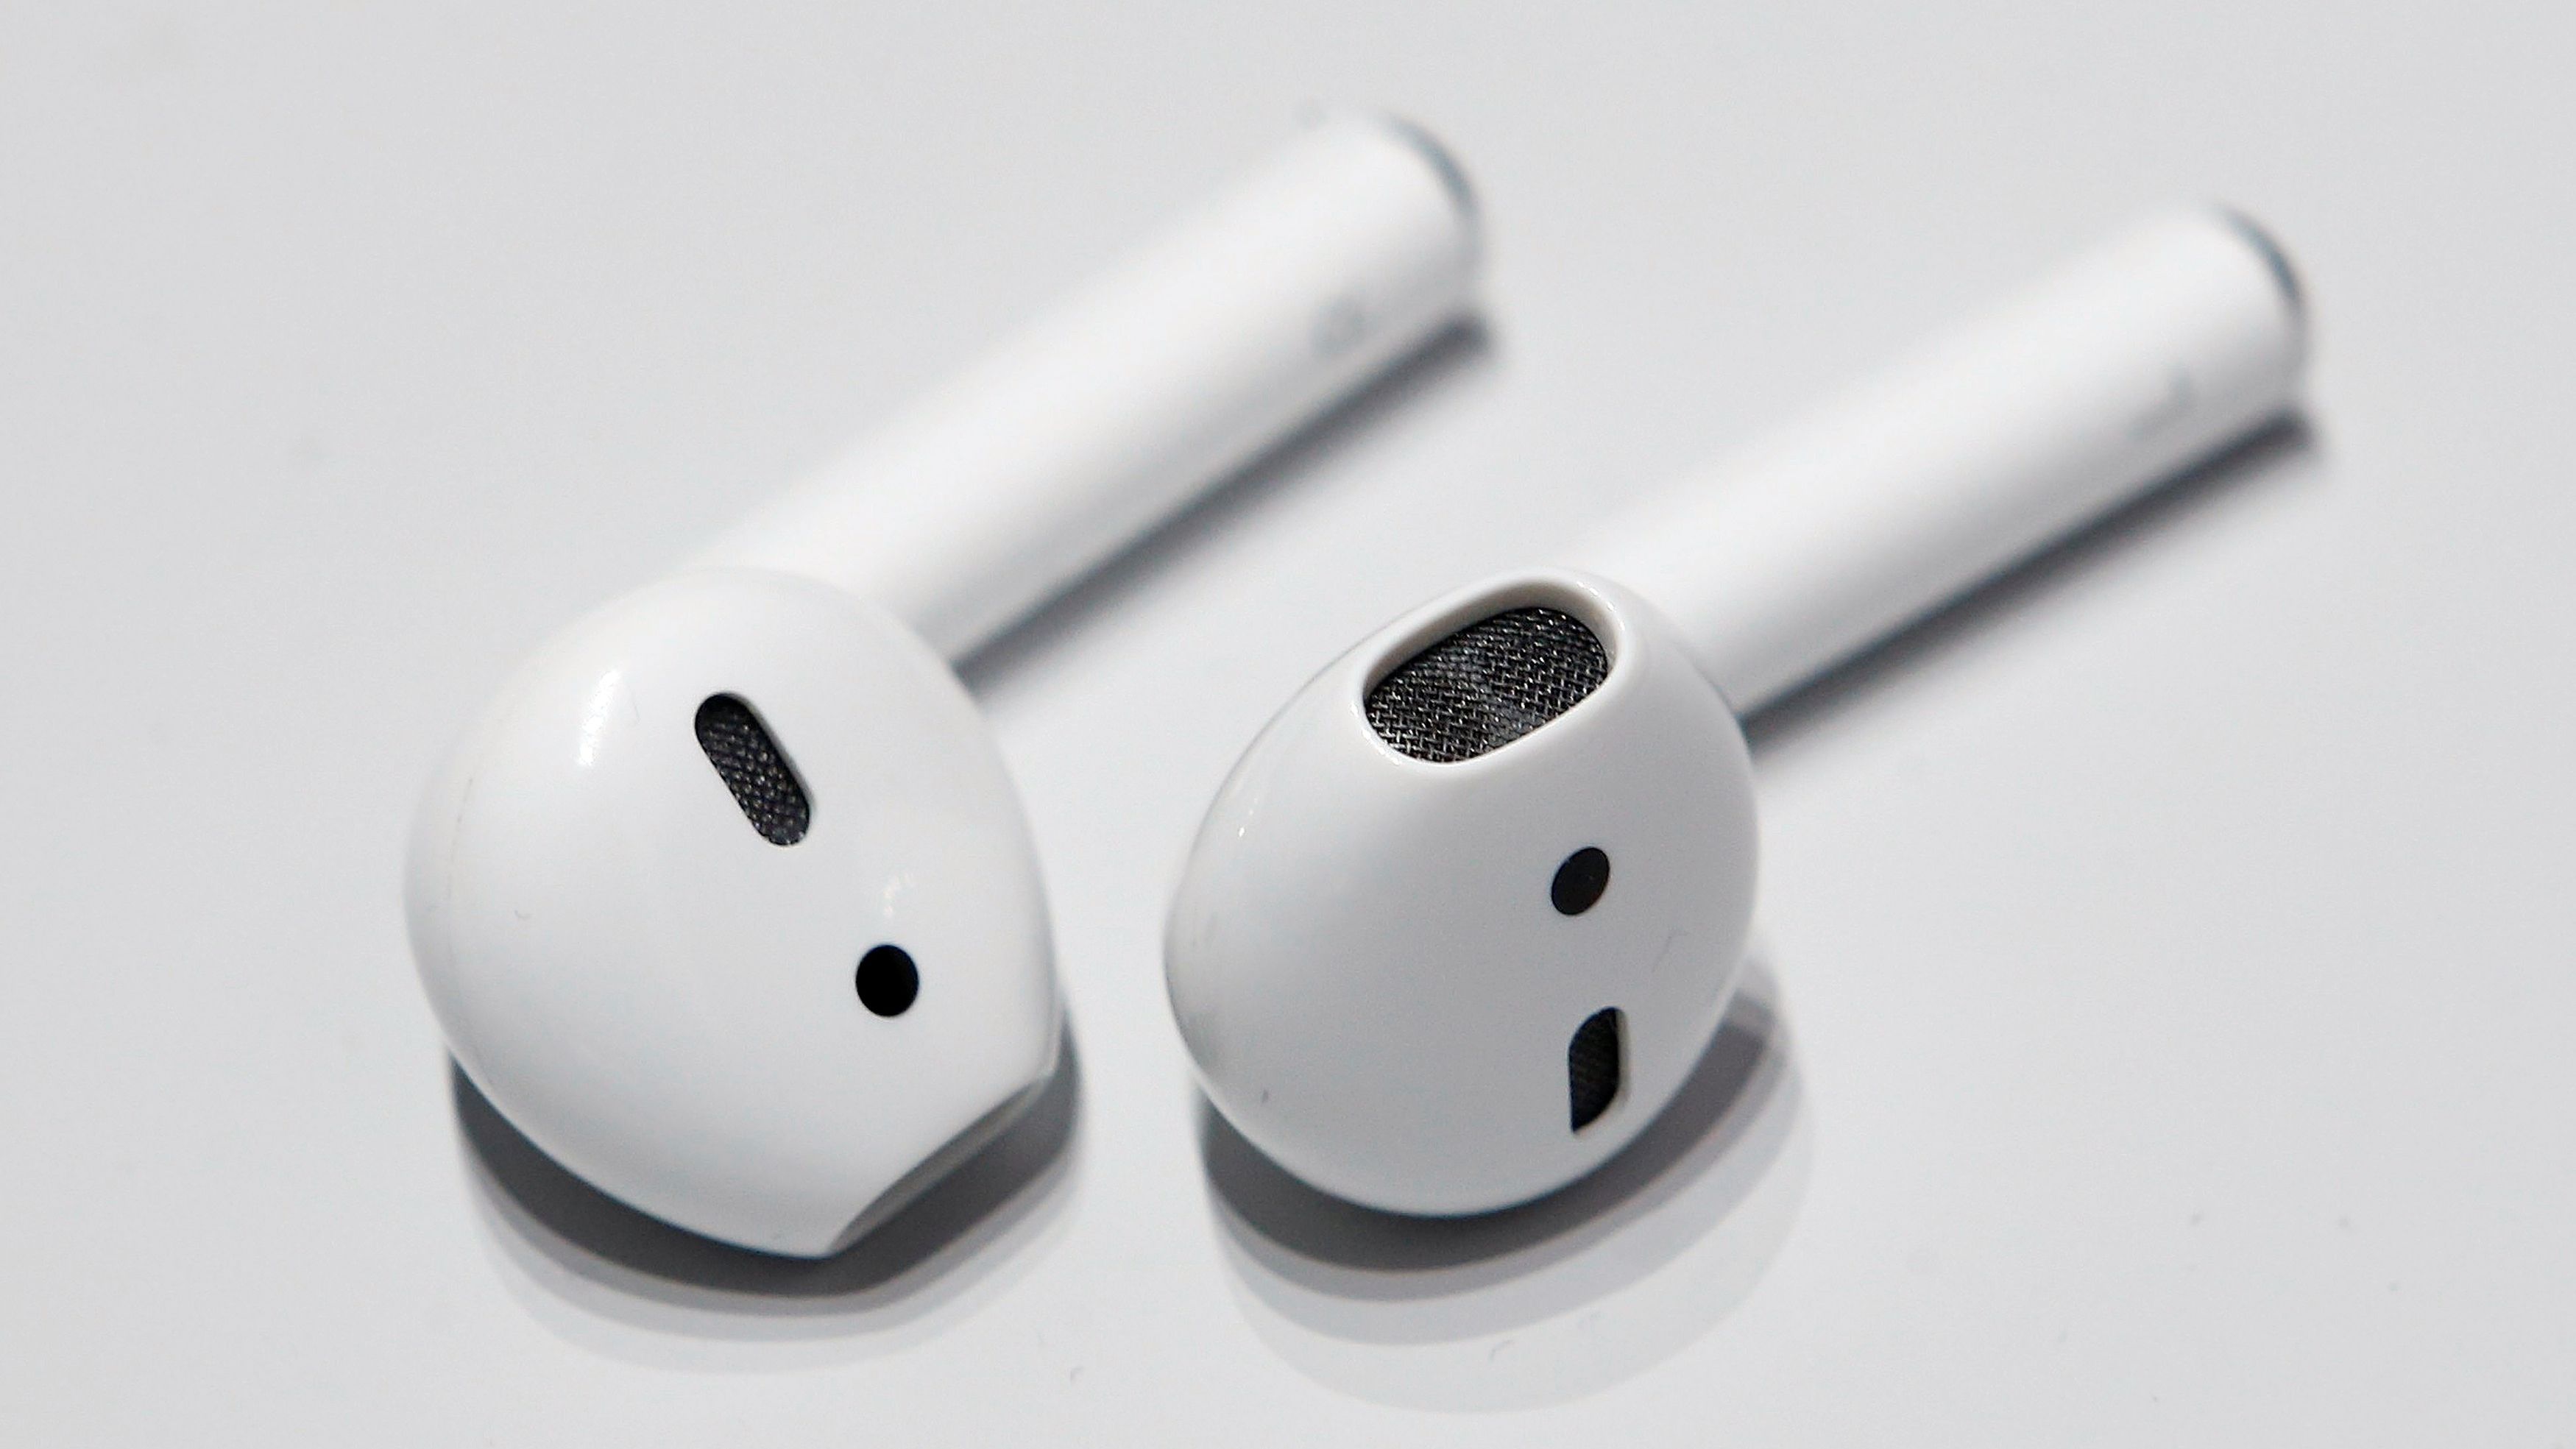 Apple (AAPL) AirPods are the most stereotypical Apple product in ...